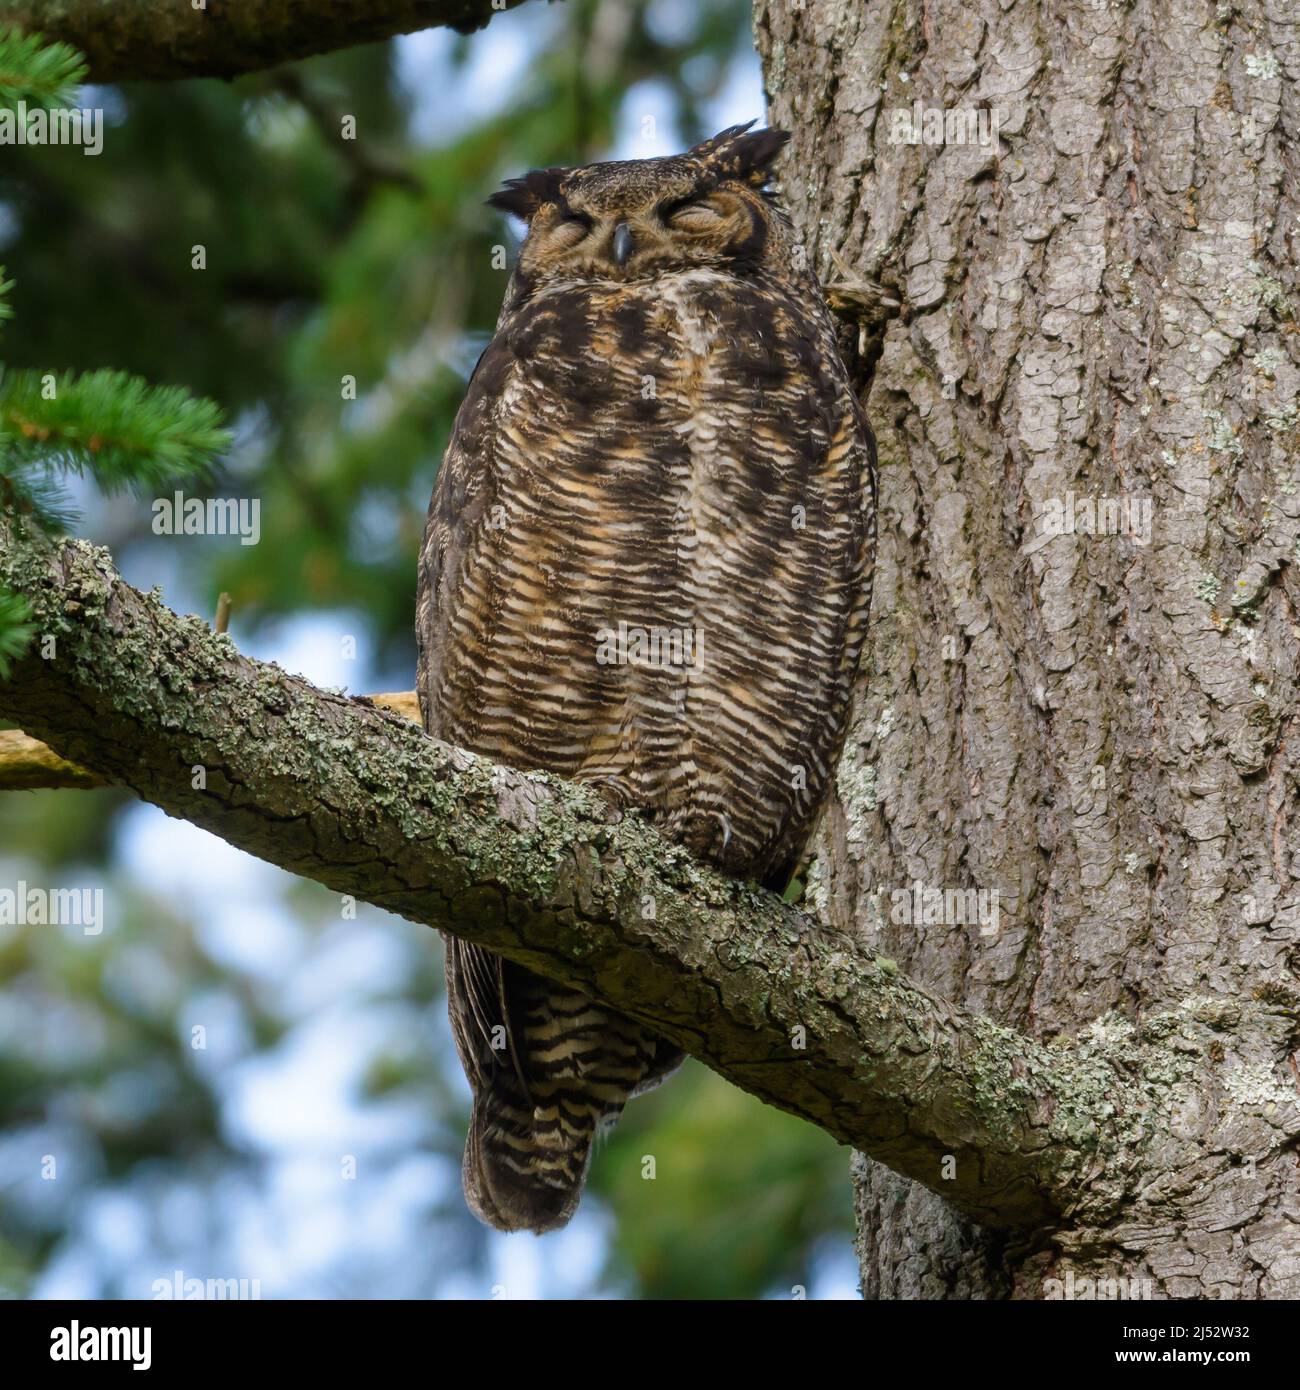 Great Horned Owl sitting in a tree sleeping, British Columbia, Canada Stock Photo